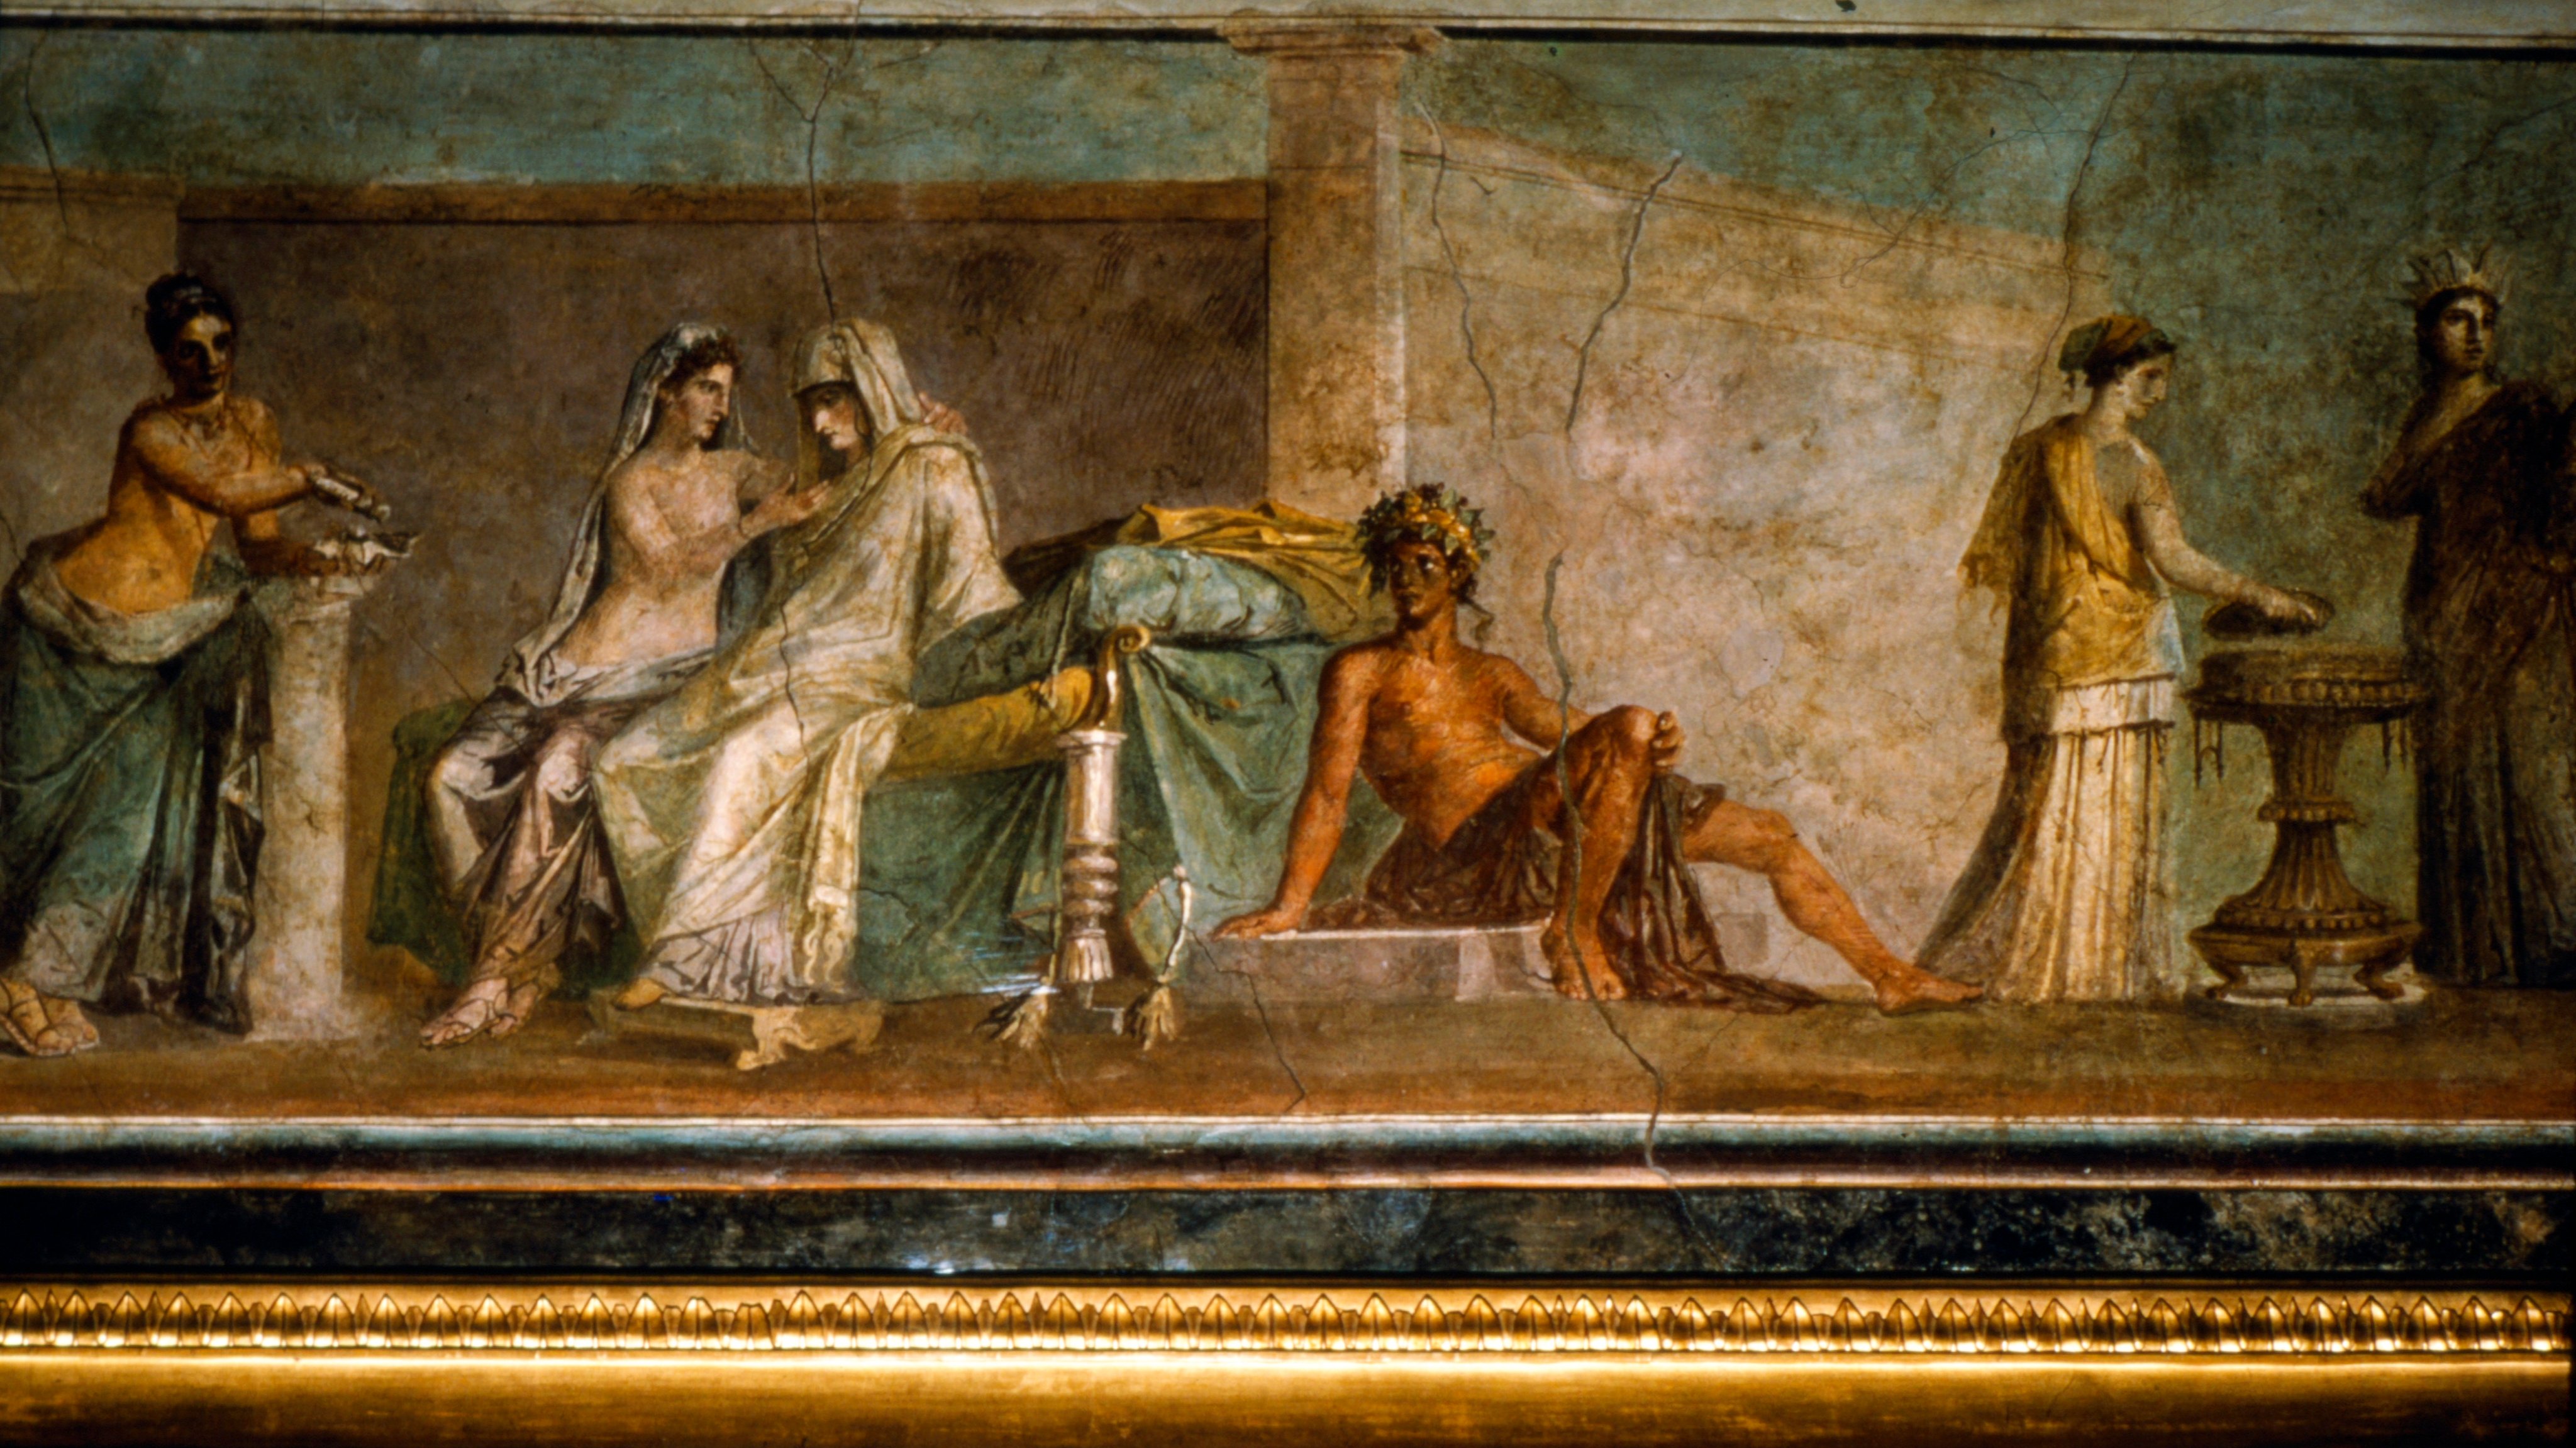 Roman Wall Painting Of Aldobrandini Wedding From Villa Of The Esquiline,